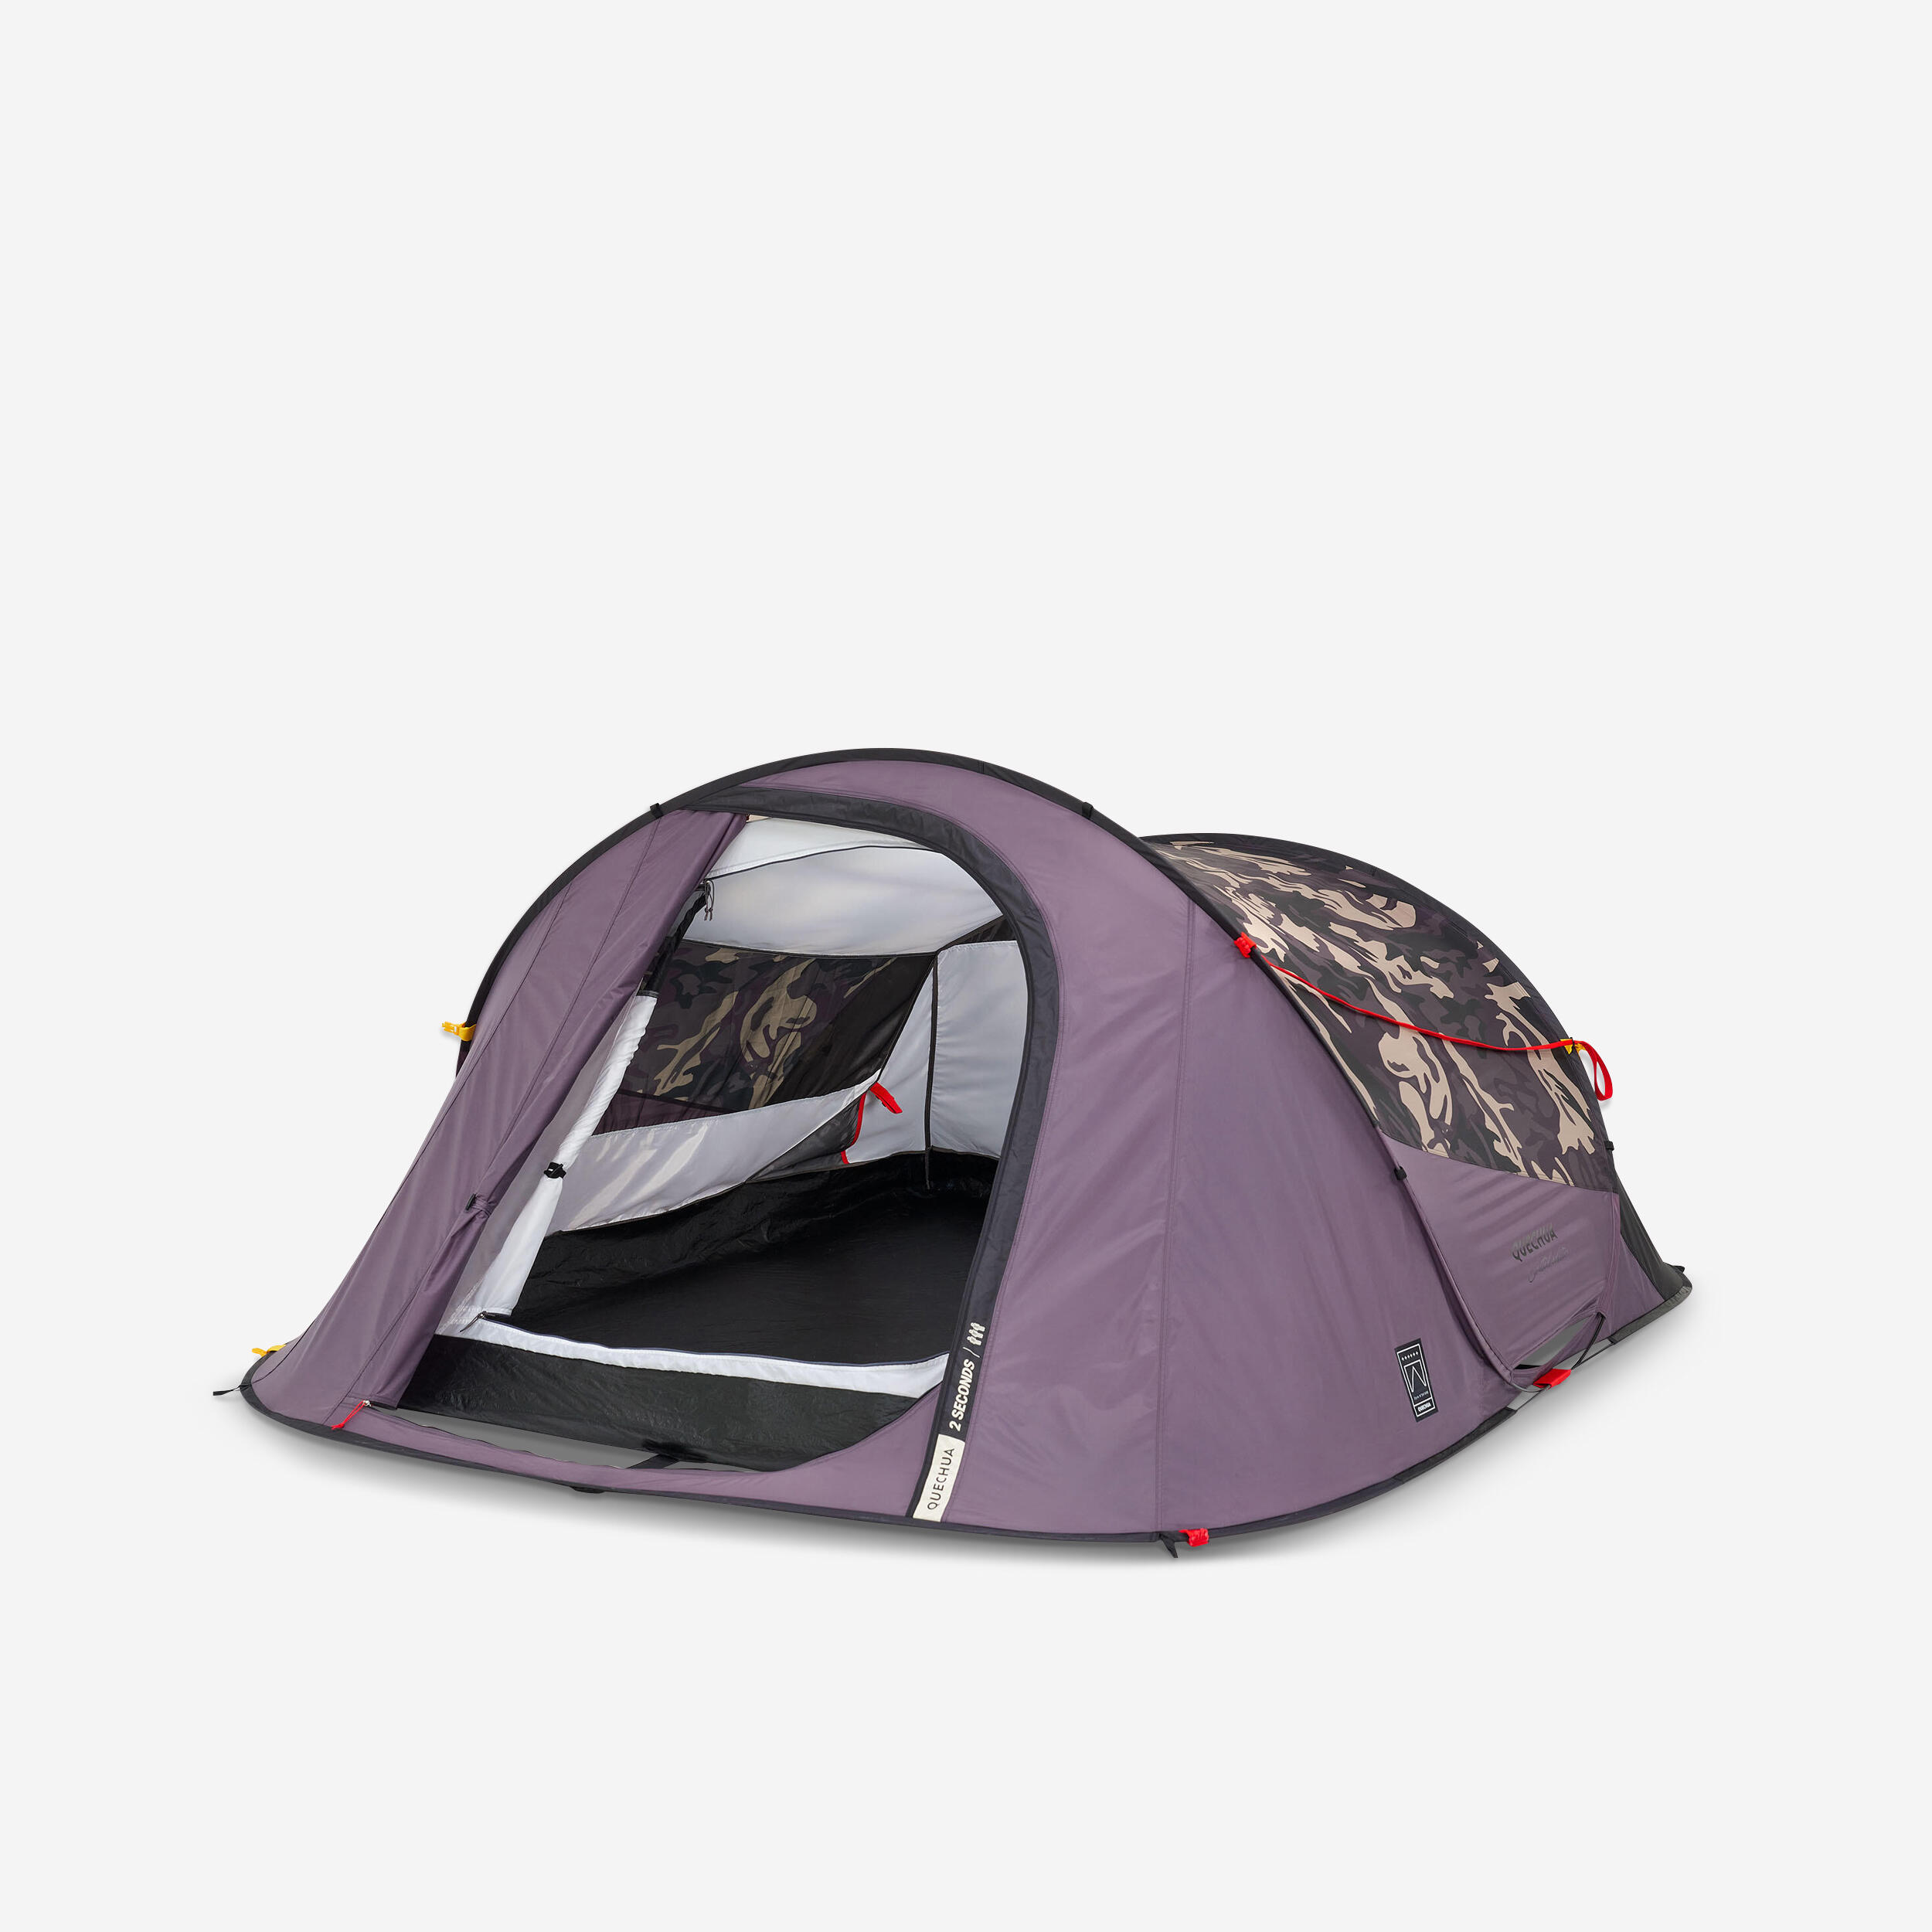 Camping tent - 2 SECONDS - 3-person 1/10